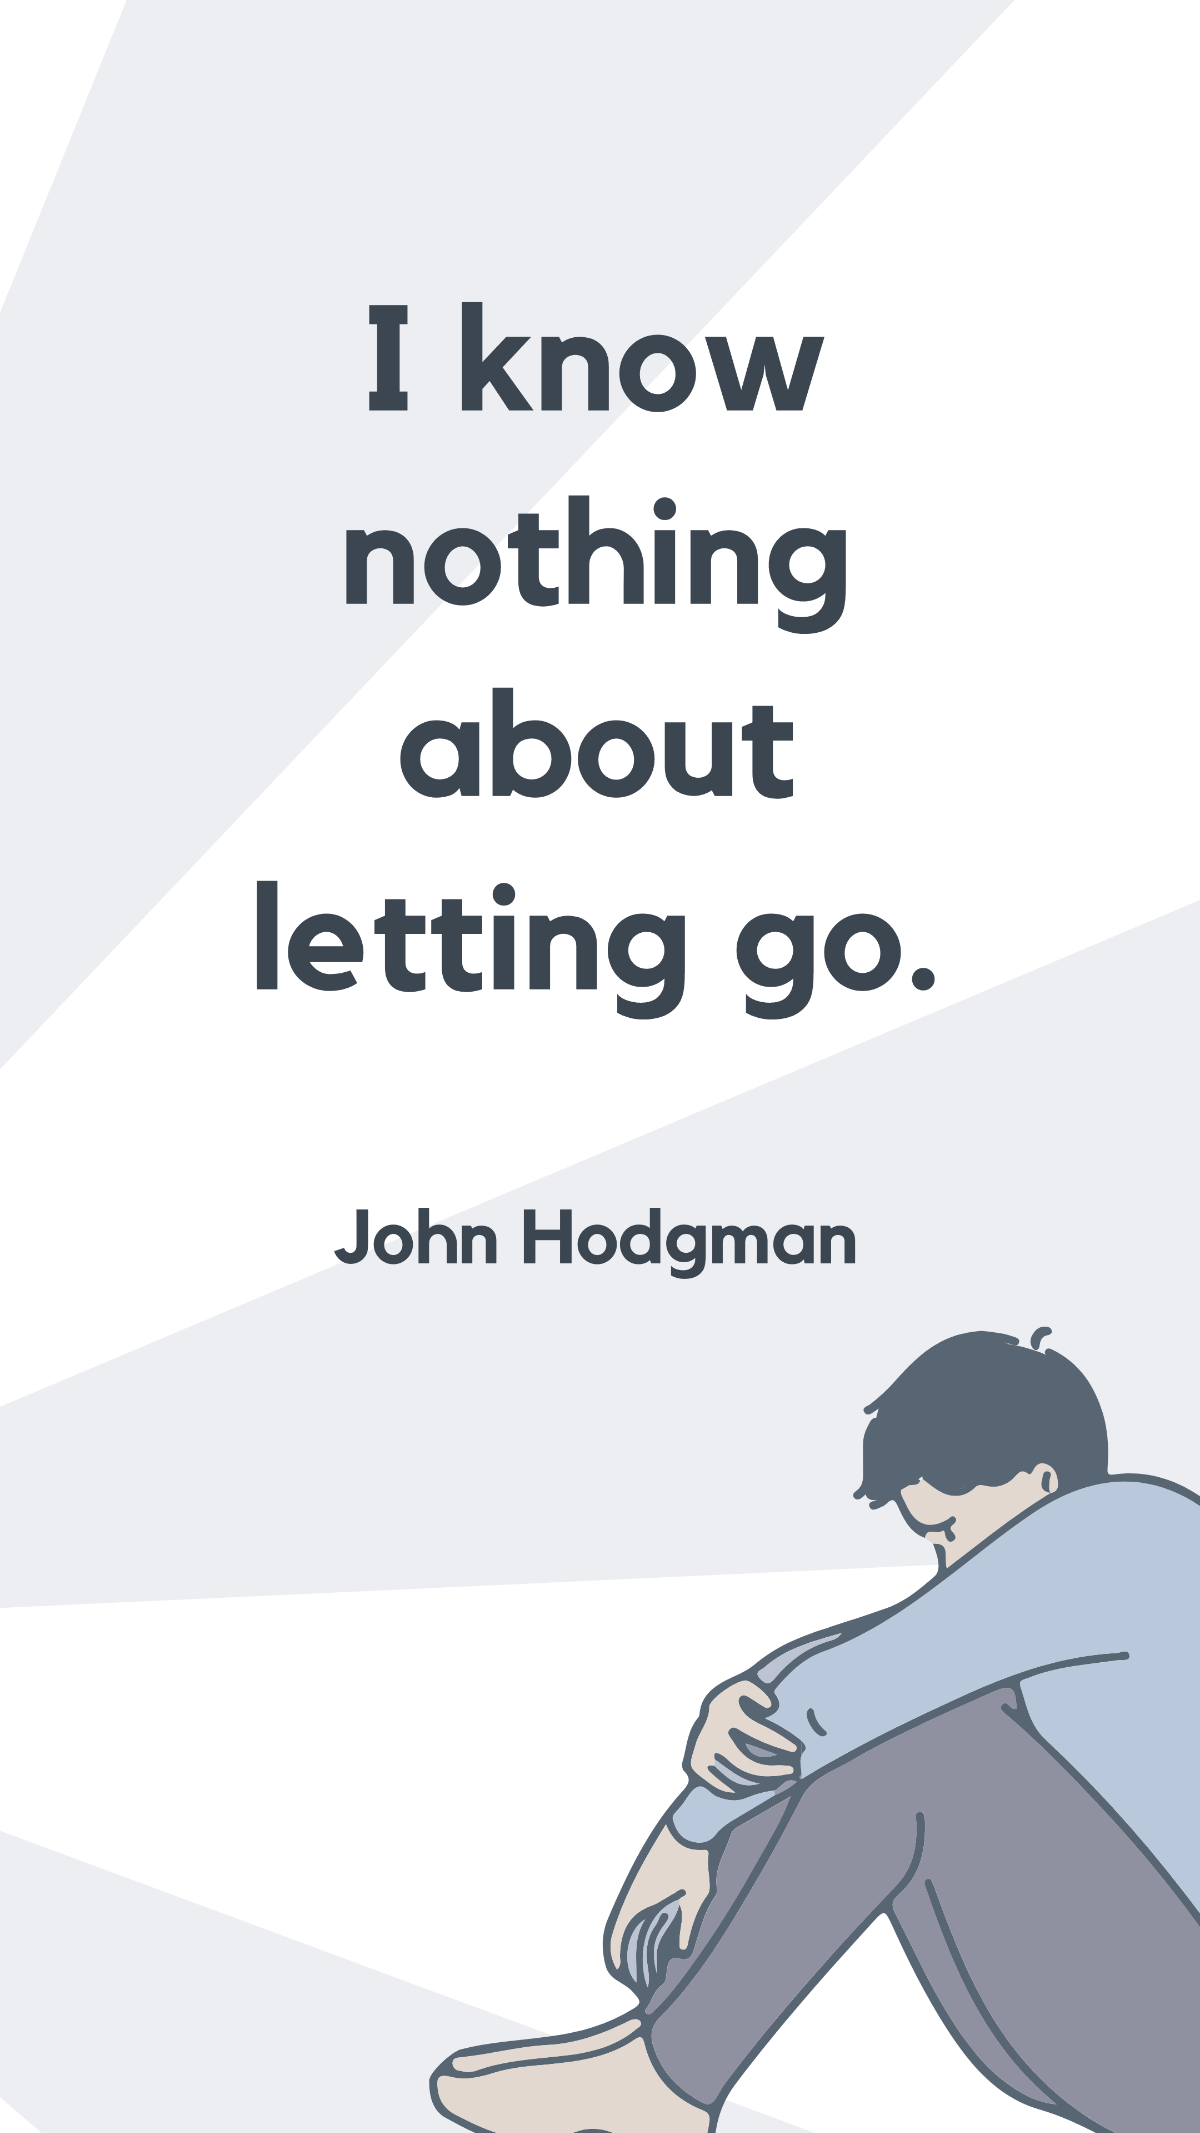 John Hodgman - I know nothing about letting go.